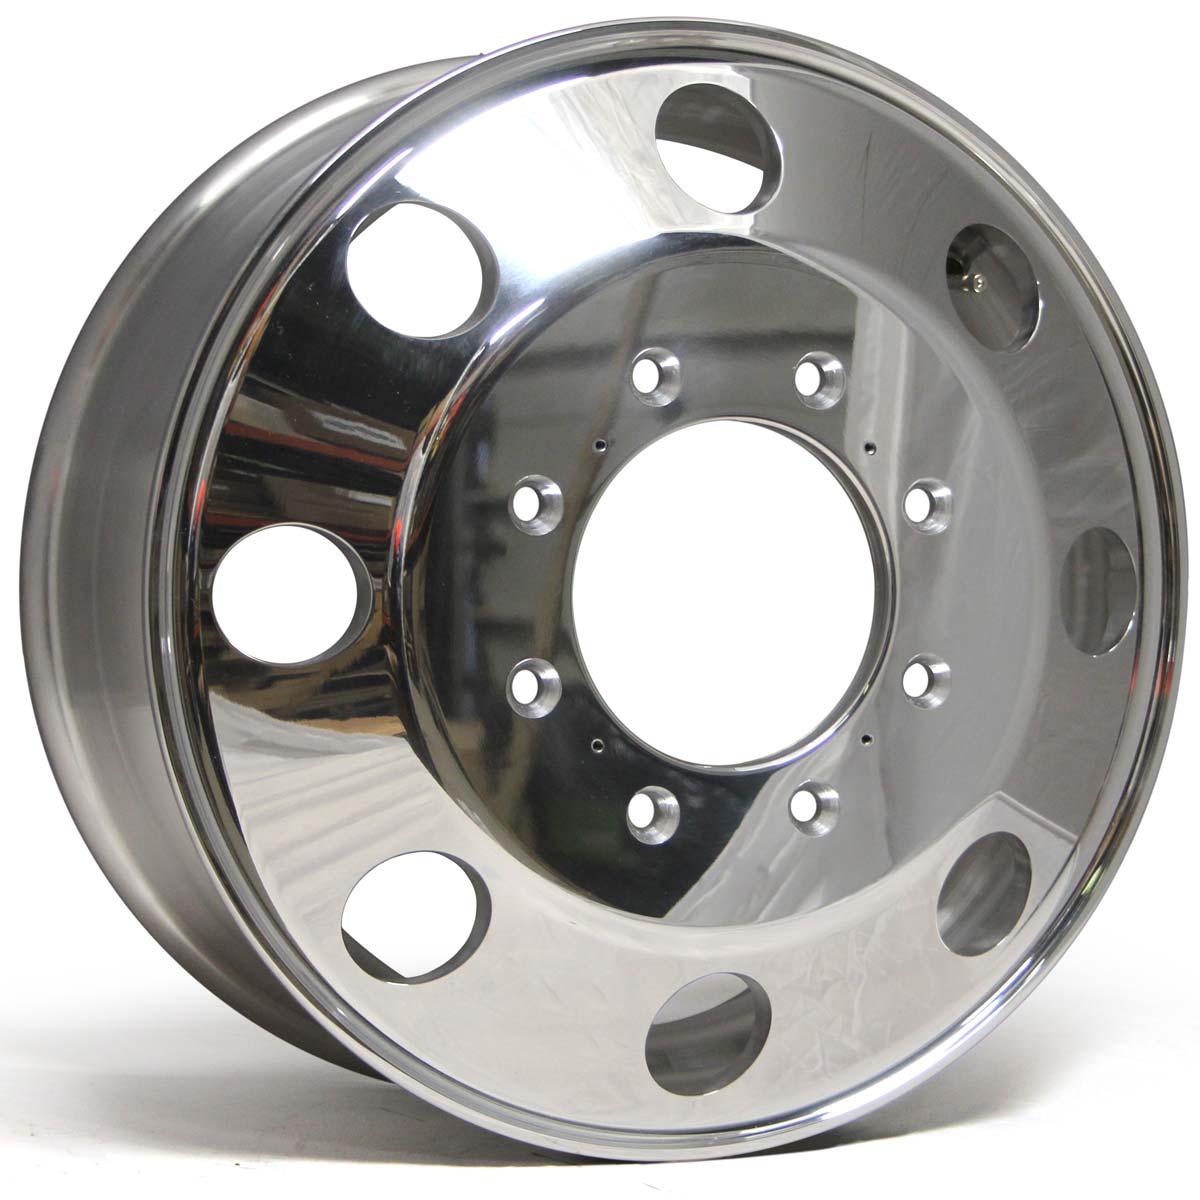 19.5" Aluminum Dual Wheels for GMC or Chevy 3500 Dually Buy Truck Wheels